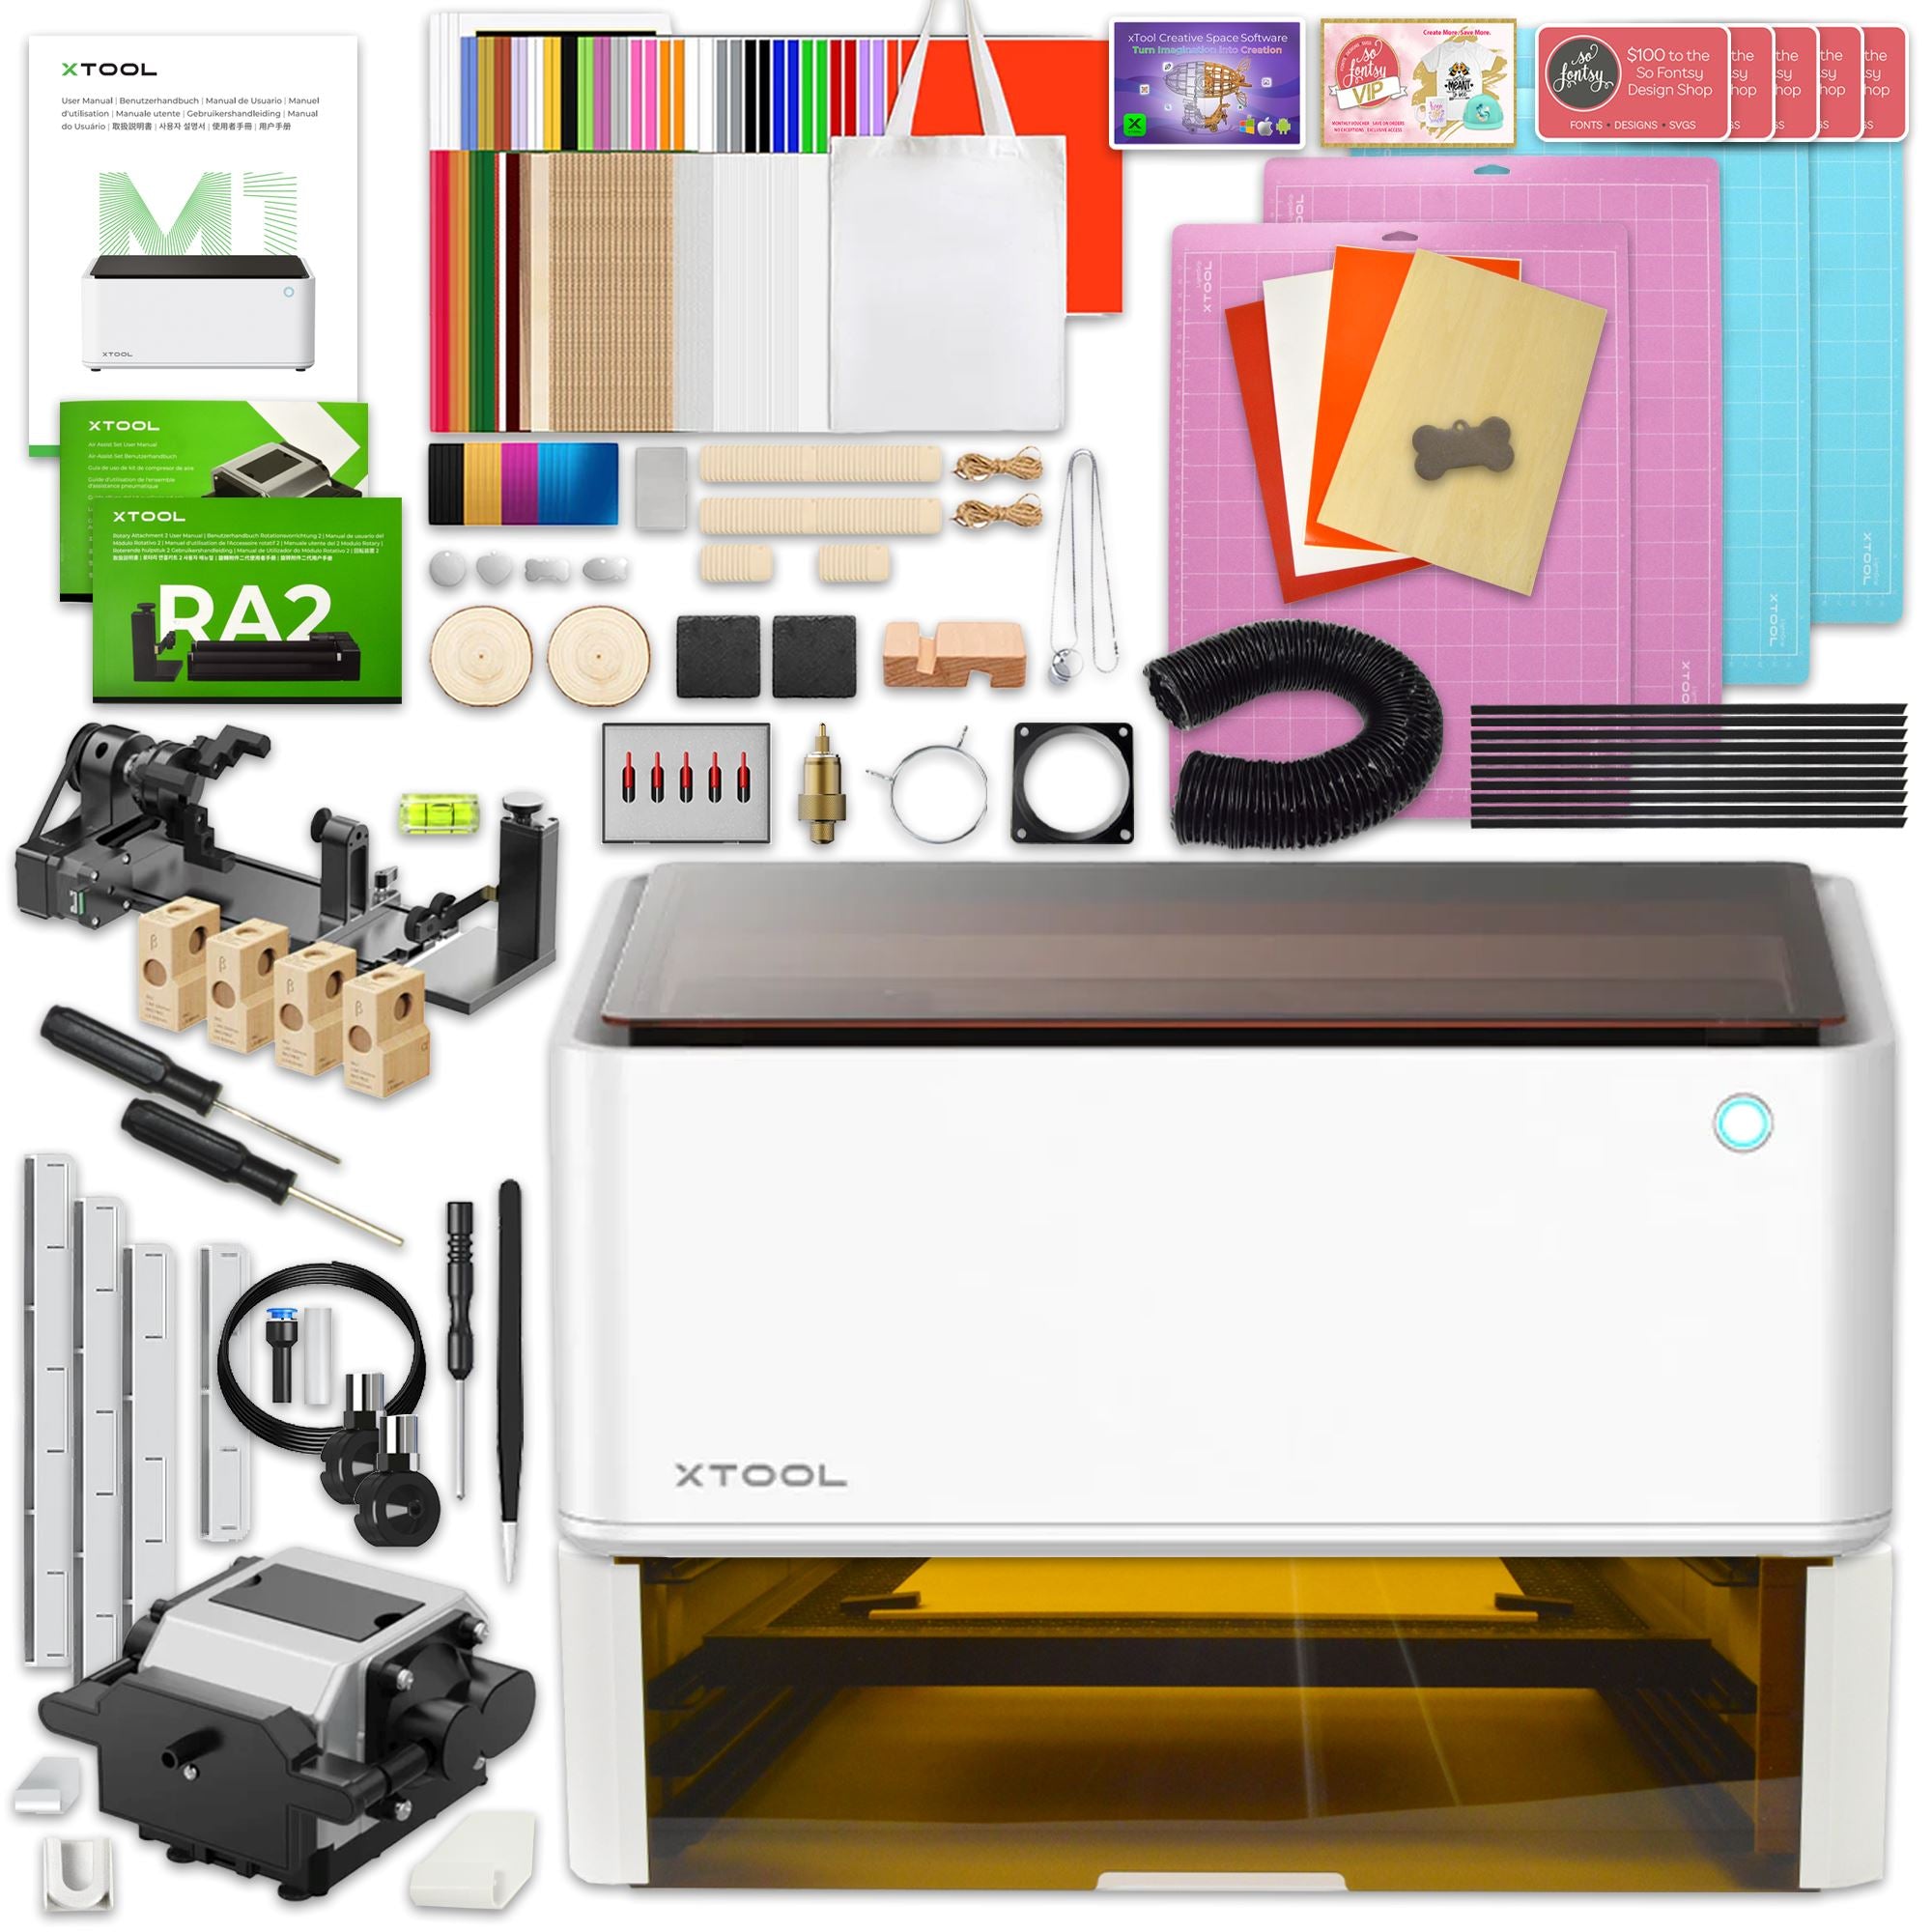 xTool M1-10W Laser Cutter/Engraver Deluxe Start-Up Business Bundle